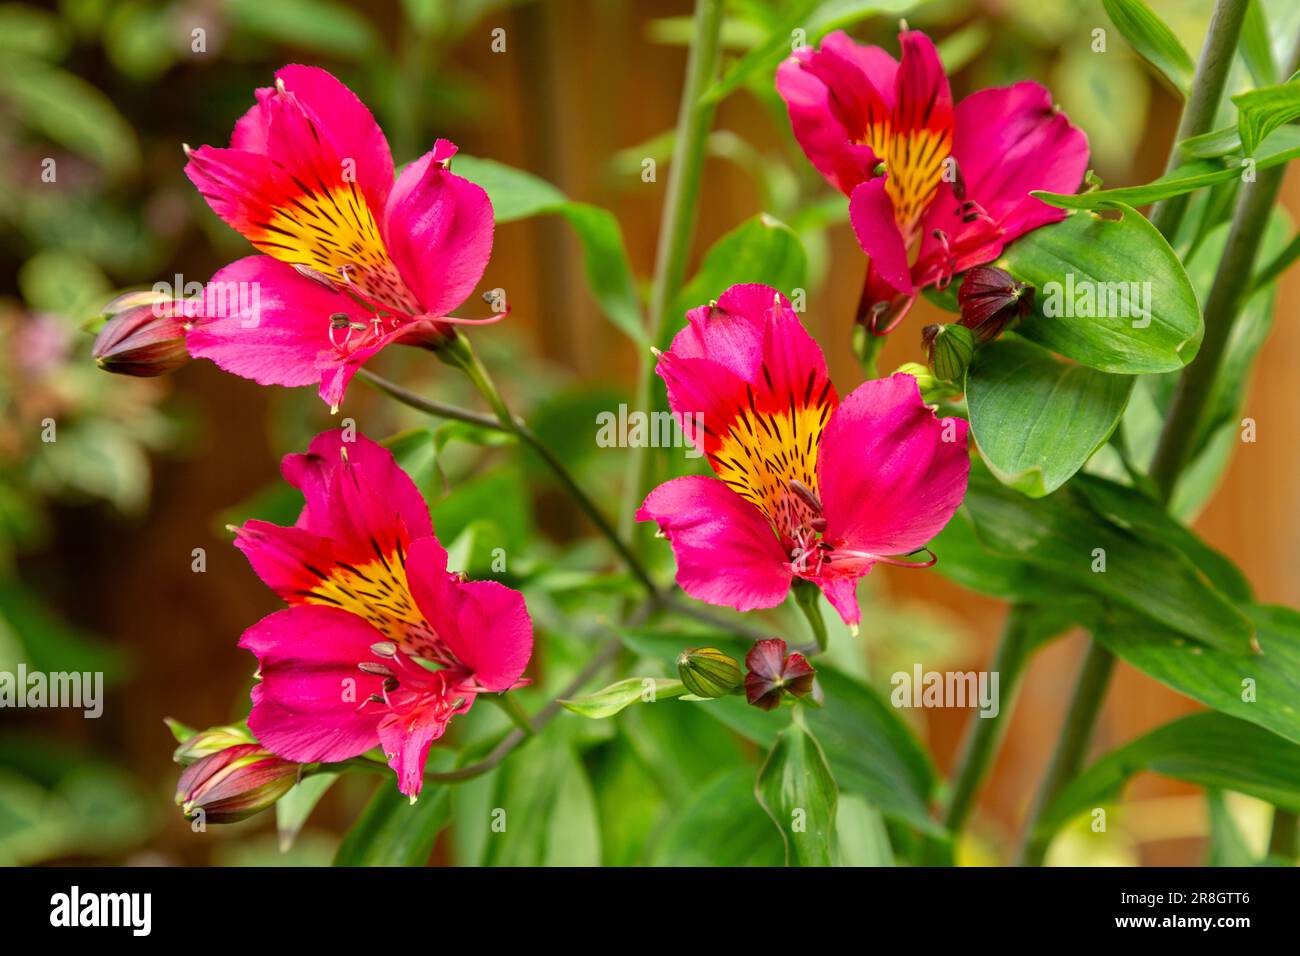 Vibrant orange/red coloured Alstroemeria flowers, commonly called the Peruvian lily or lily of the Incas Stock Photo